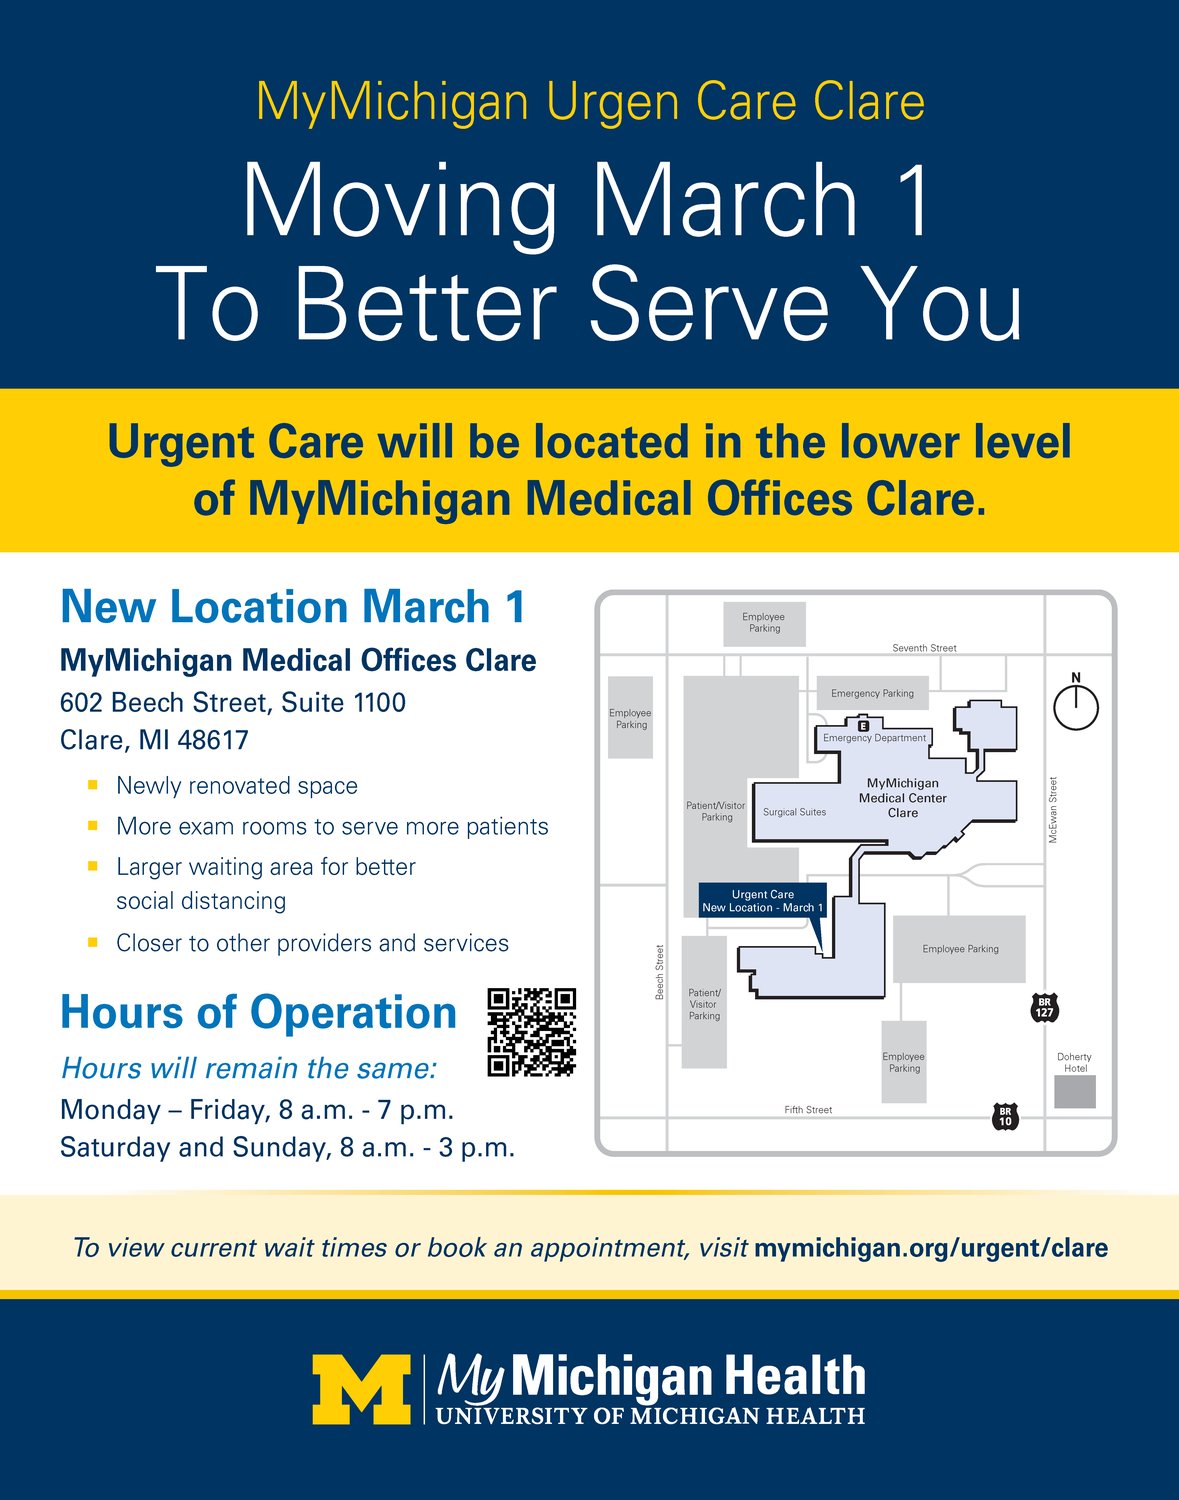 MyMichigan Urgent Care Clare is moving Wednesday, March 1, to a new location in the lower level of MyMichigan Medical Offices Clare, 602 Beech St. Suite 1100.